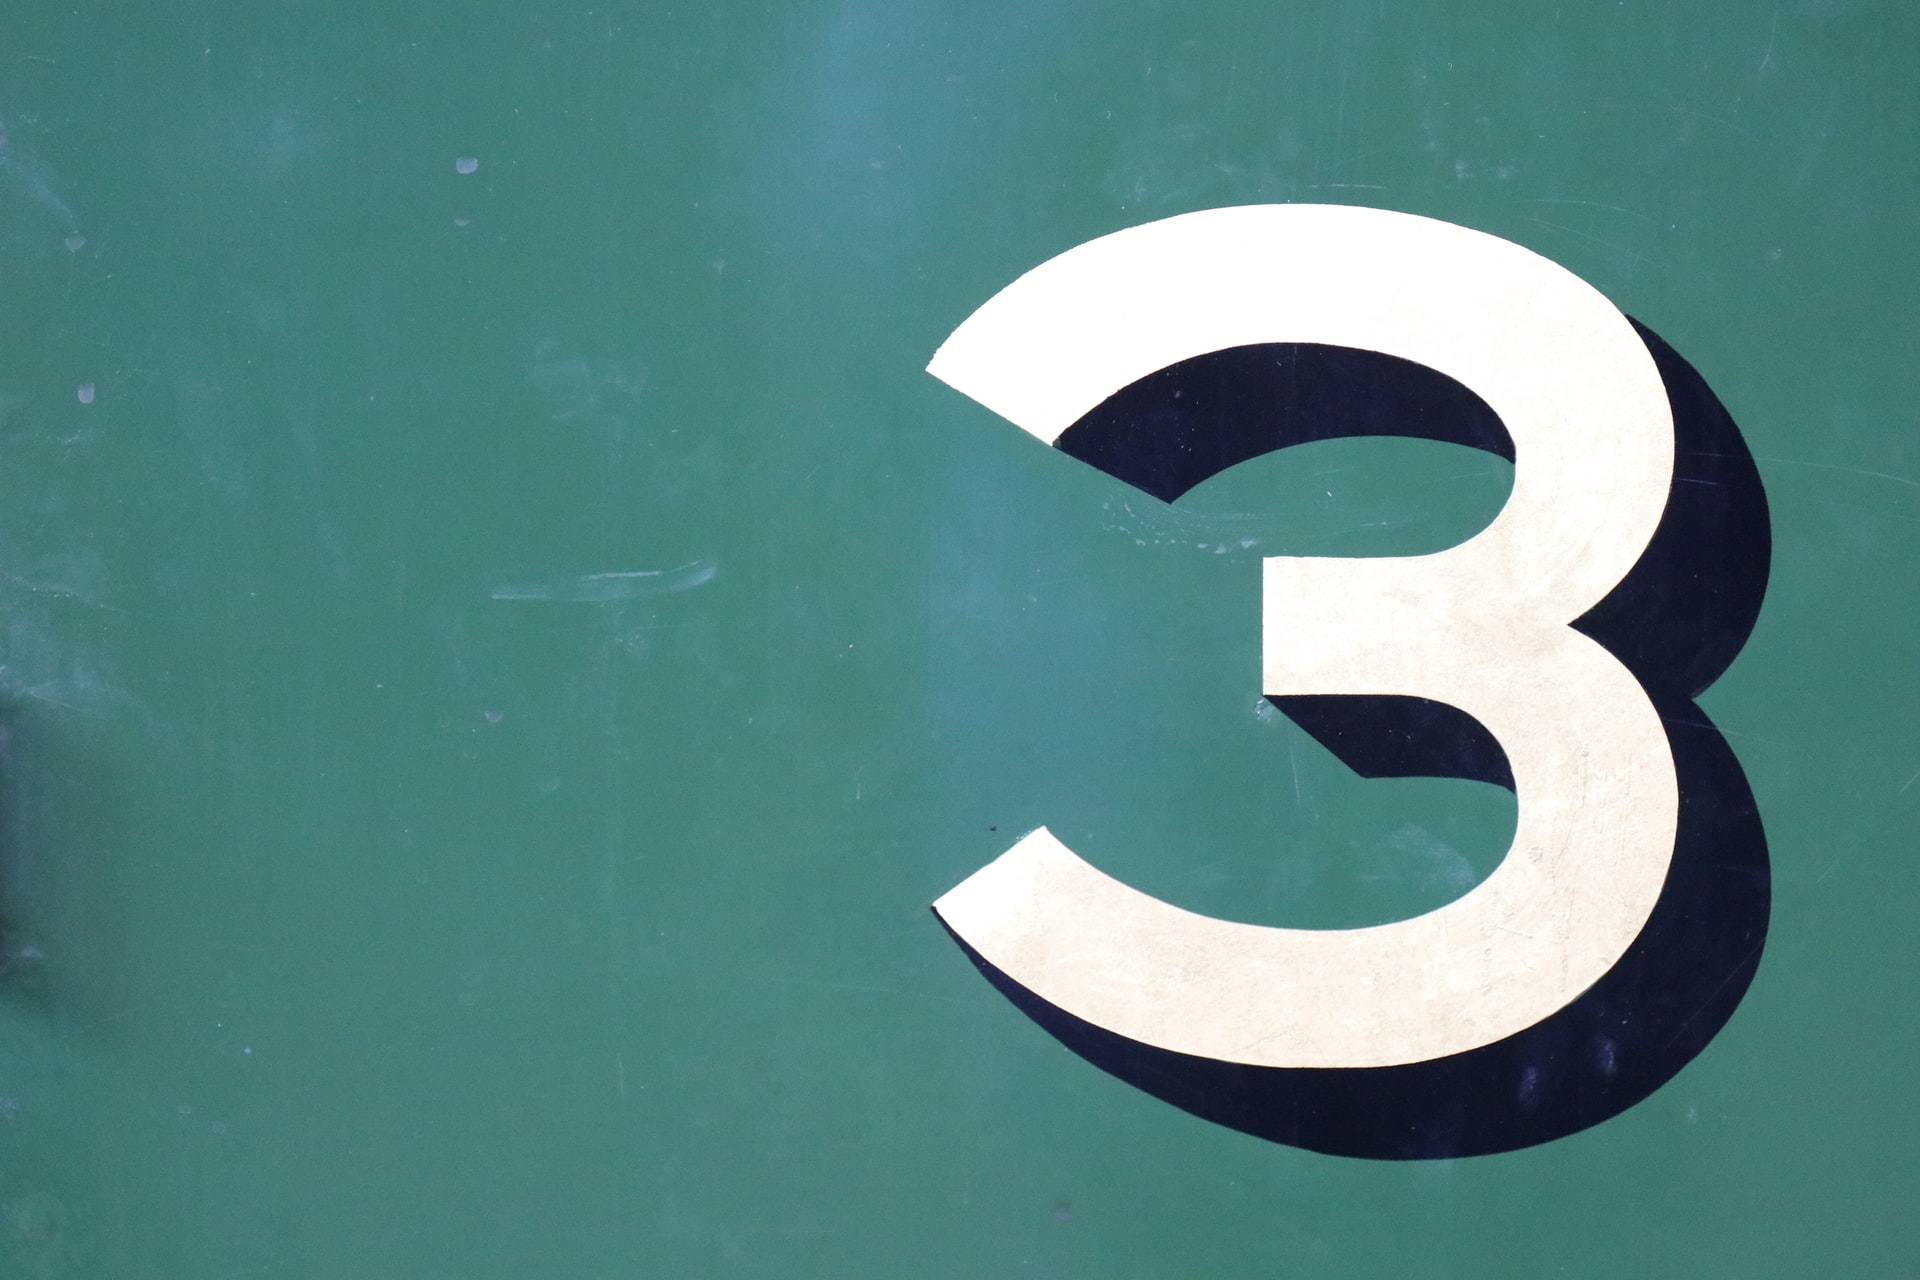 Photo of "3" sign by Tony Hand on Unsplash